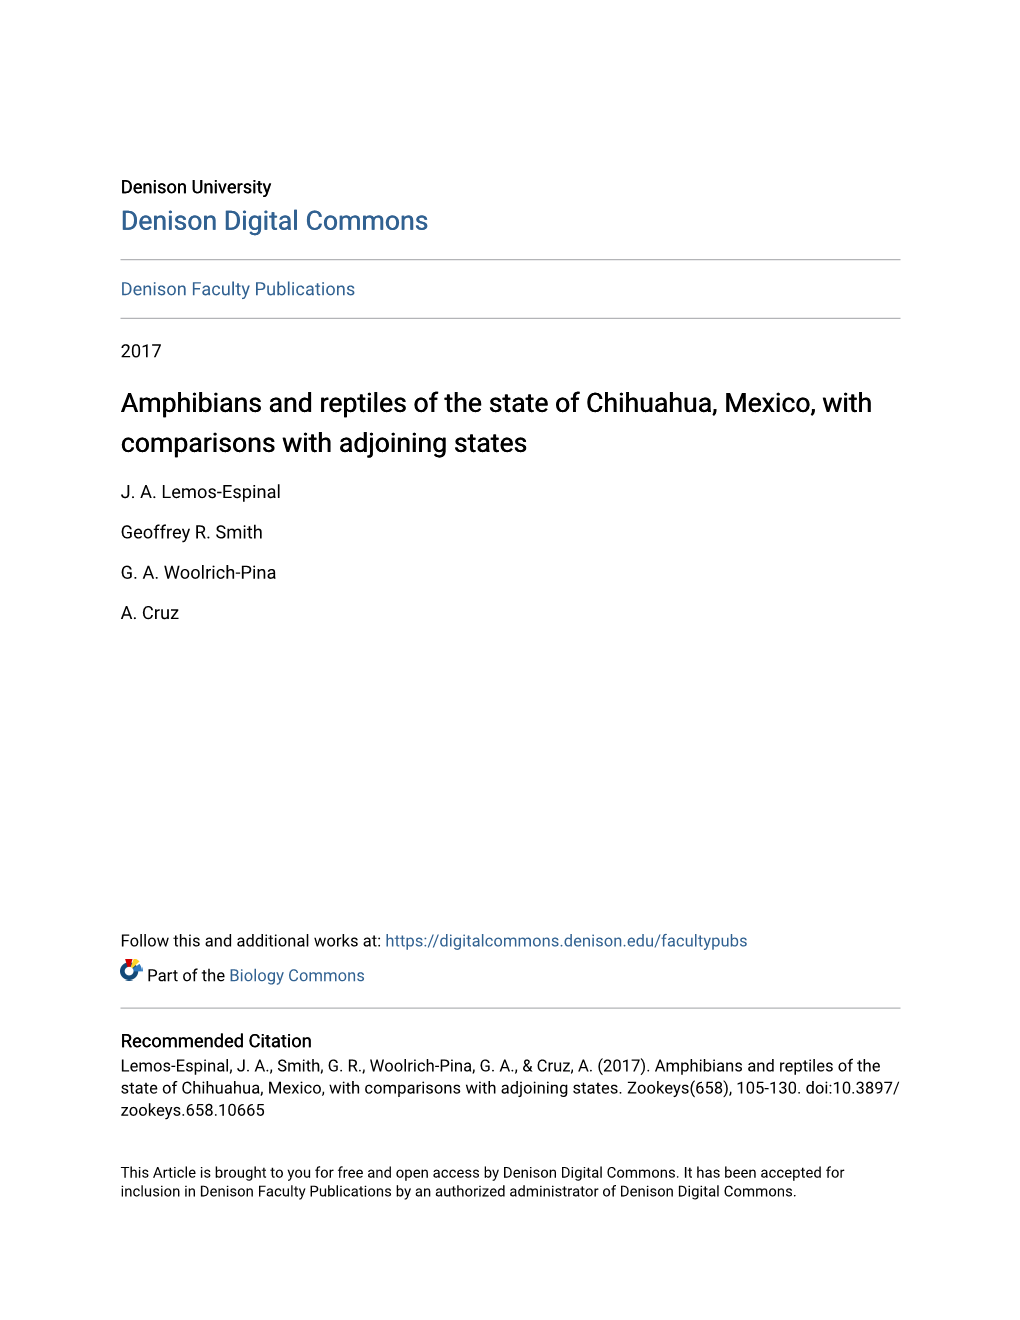 Amphibians and Reptiles of the State of Chihuahua, Mexico, with Comparisons with Adjoining States